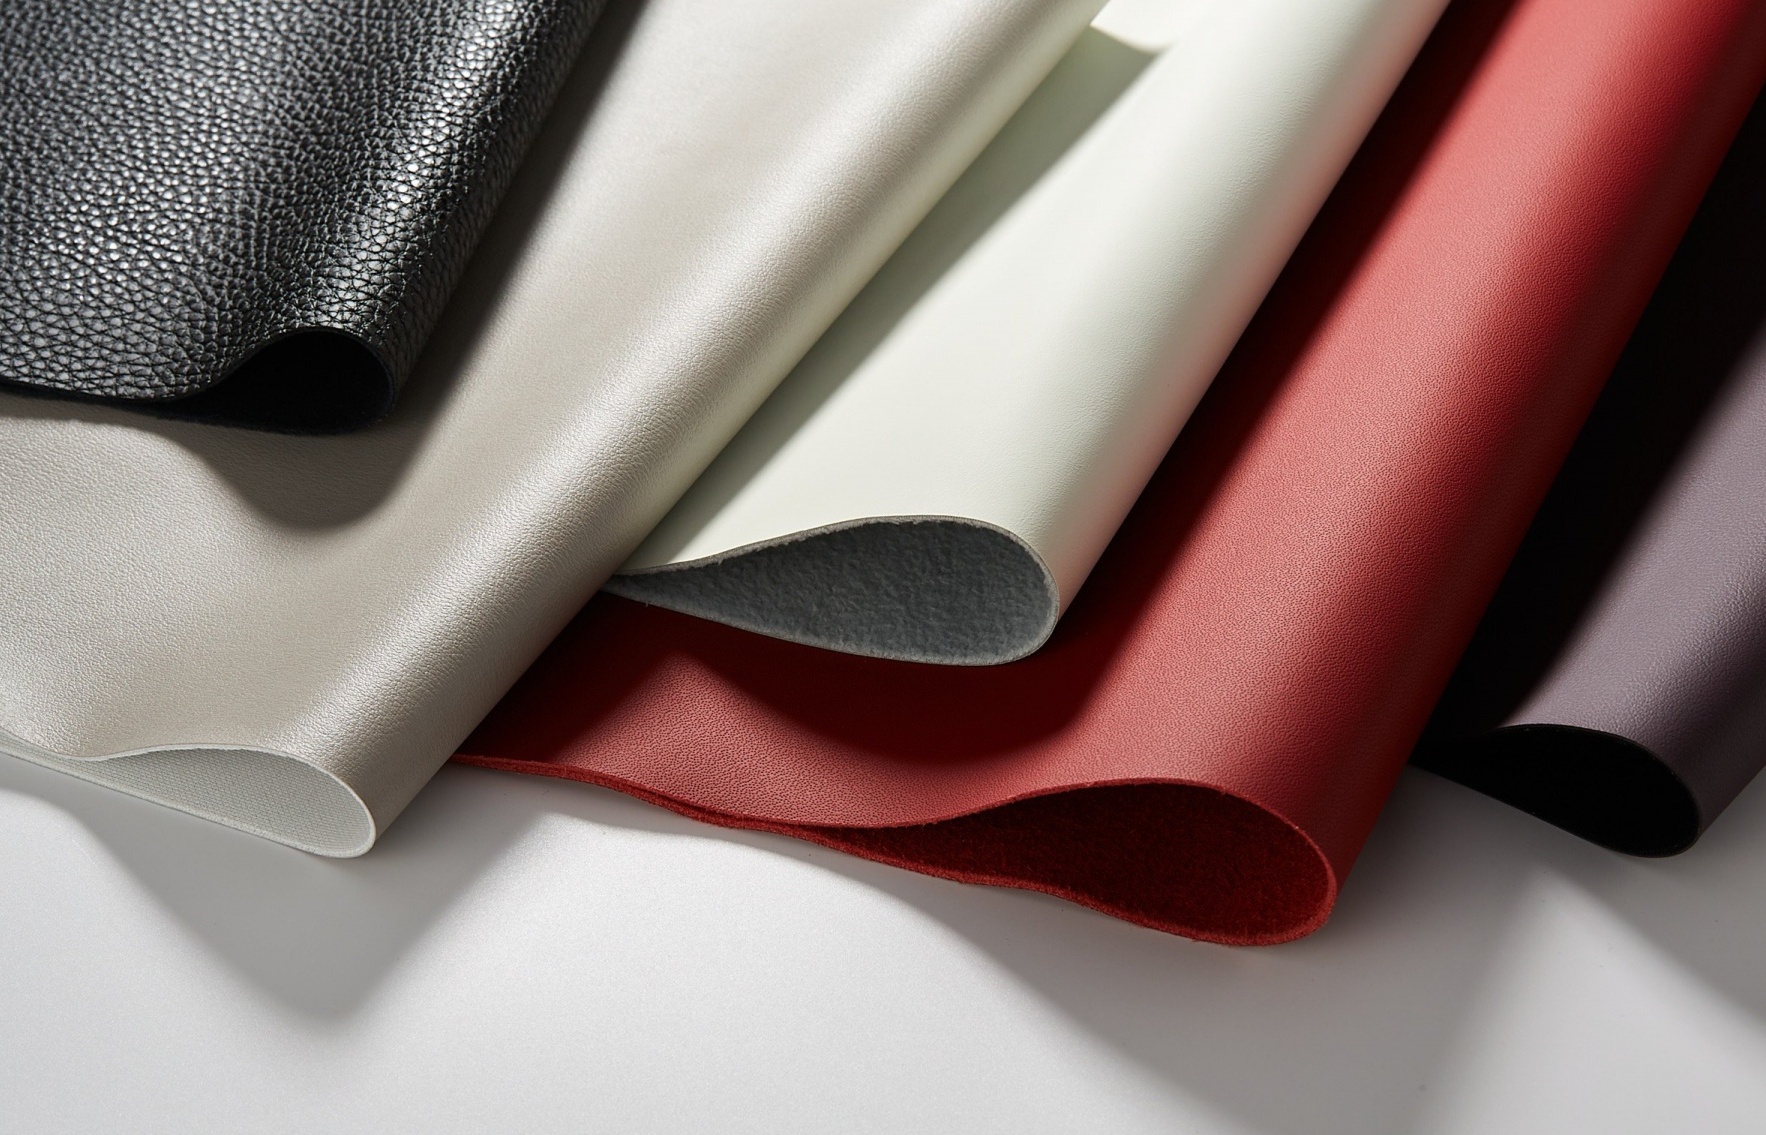 BASF introduces future of sustainable synthetic leather